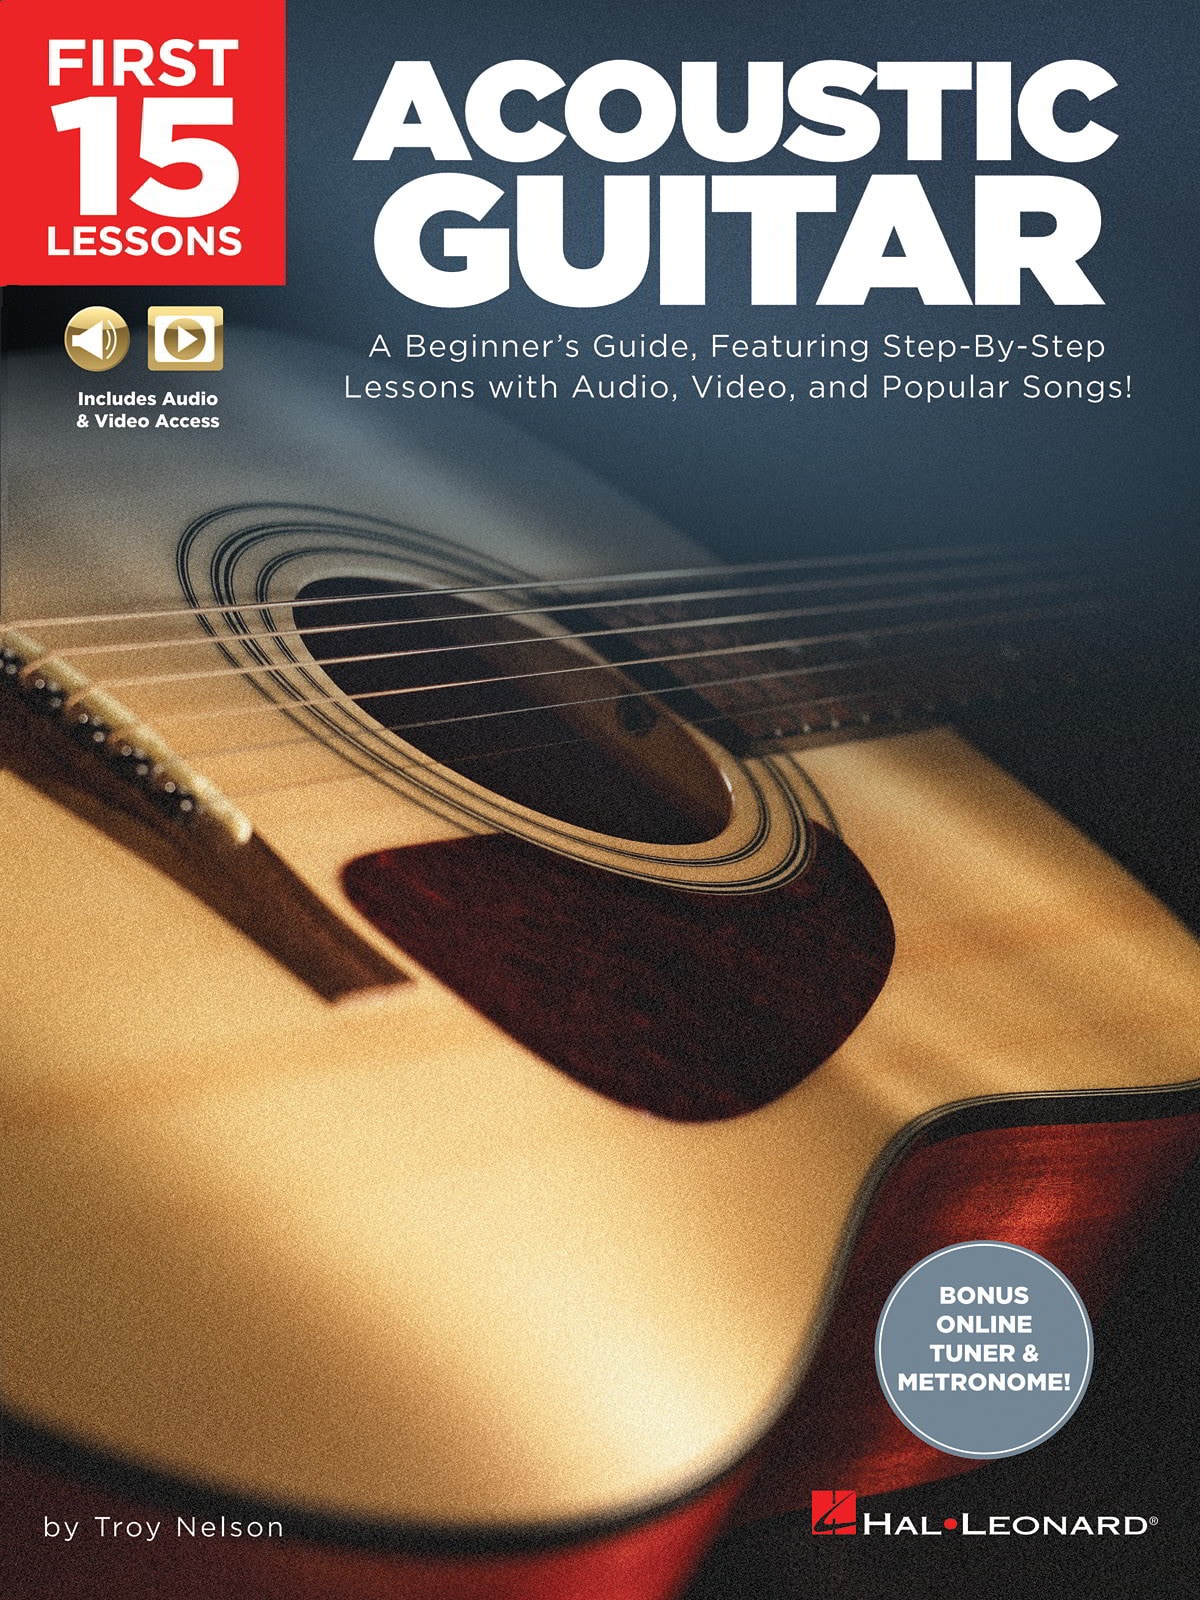 First 15 Lessons: Acoustic Guitar published by Hal Leonard